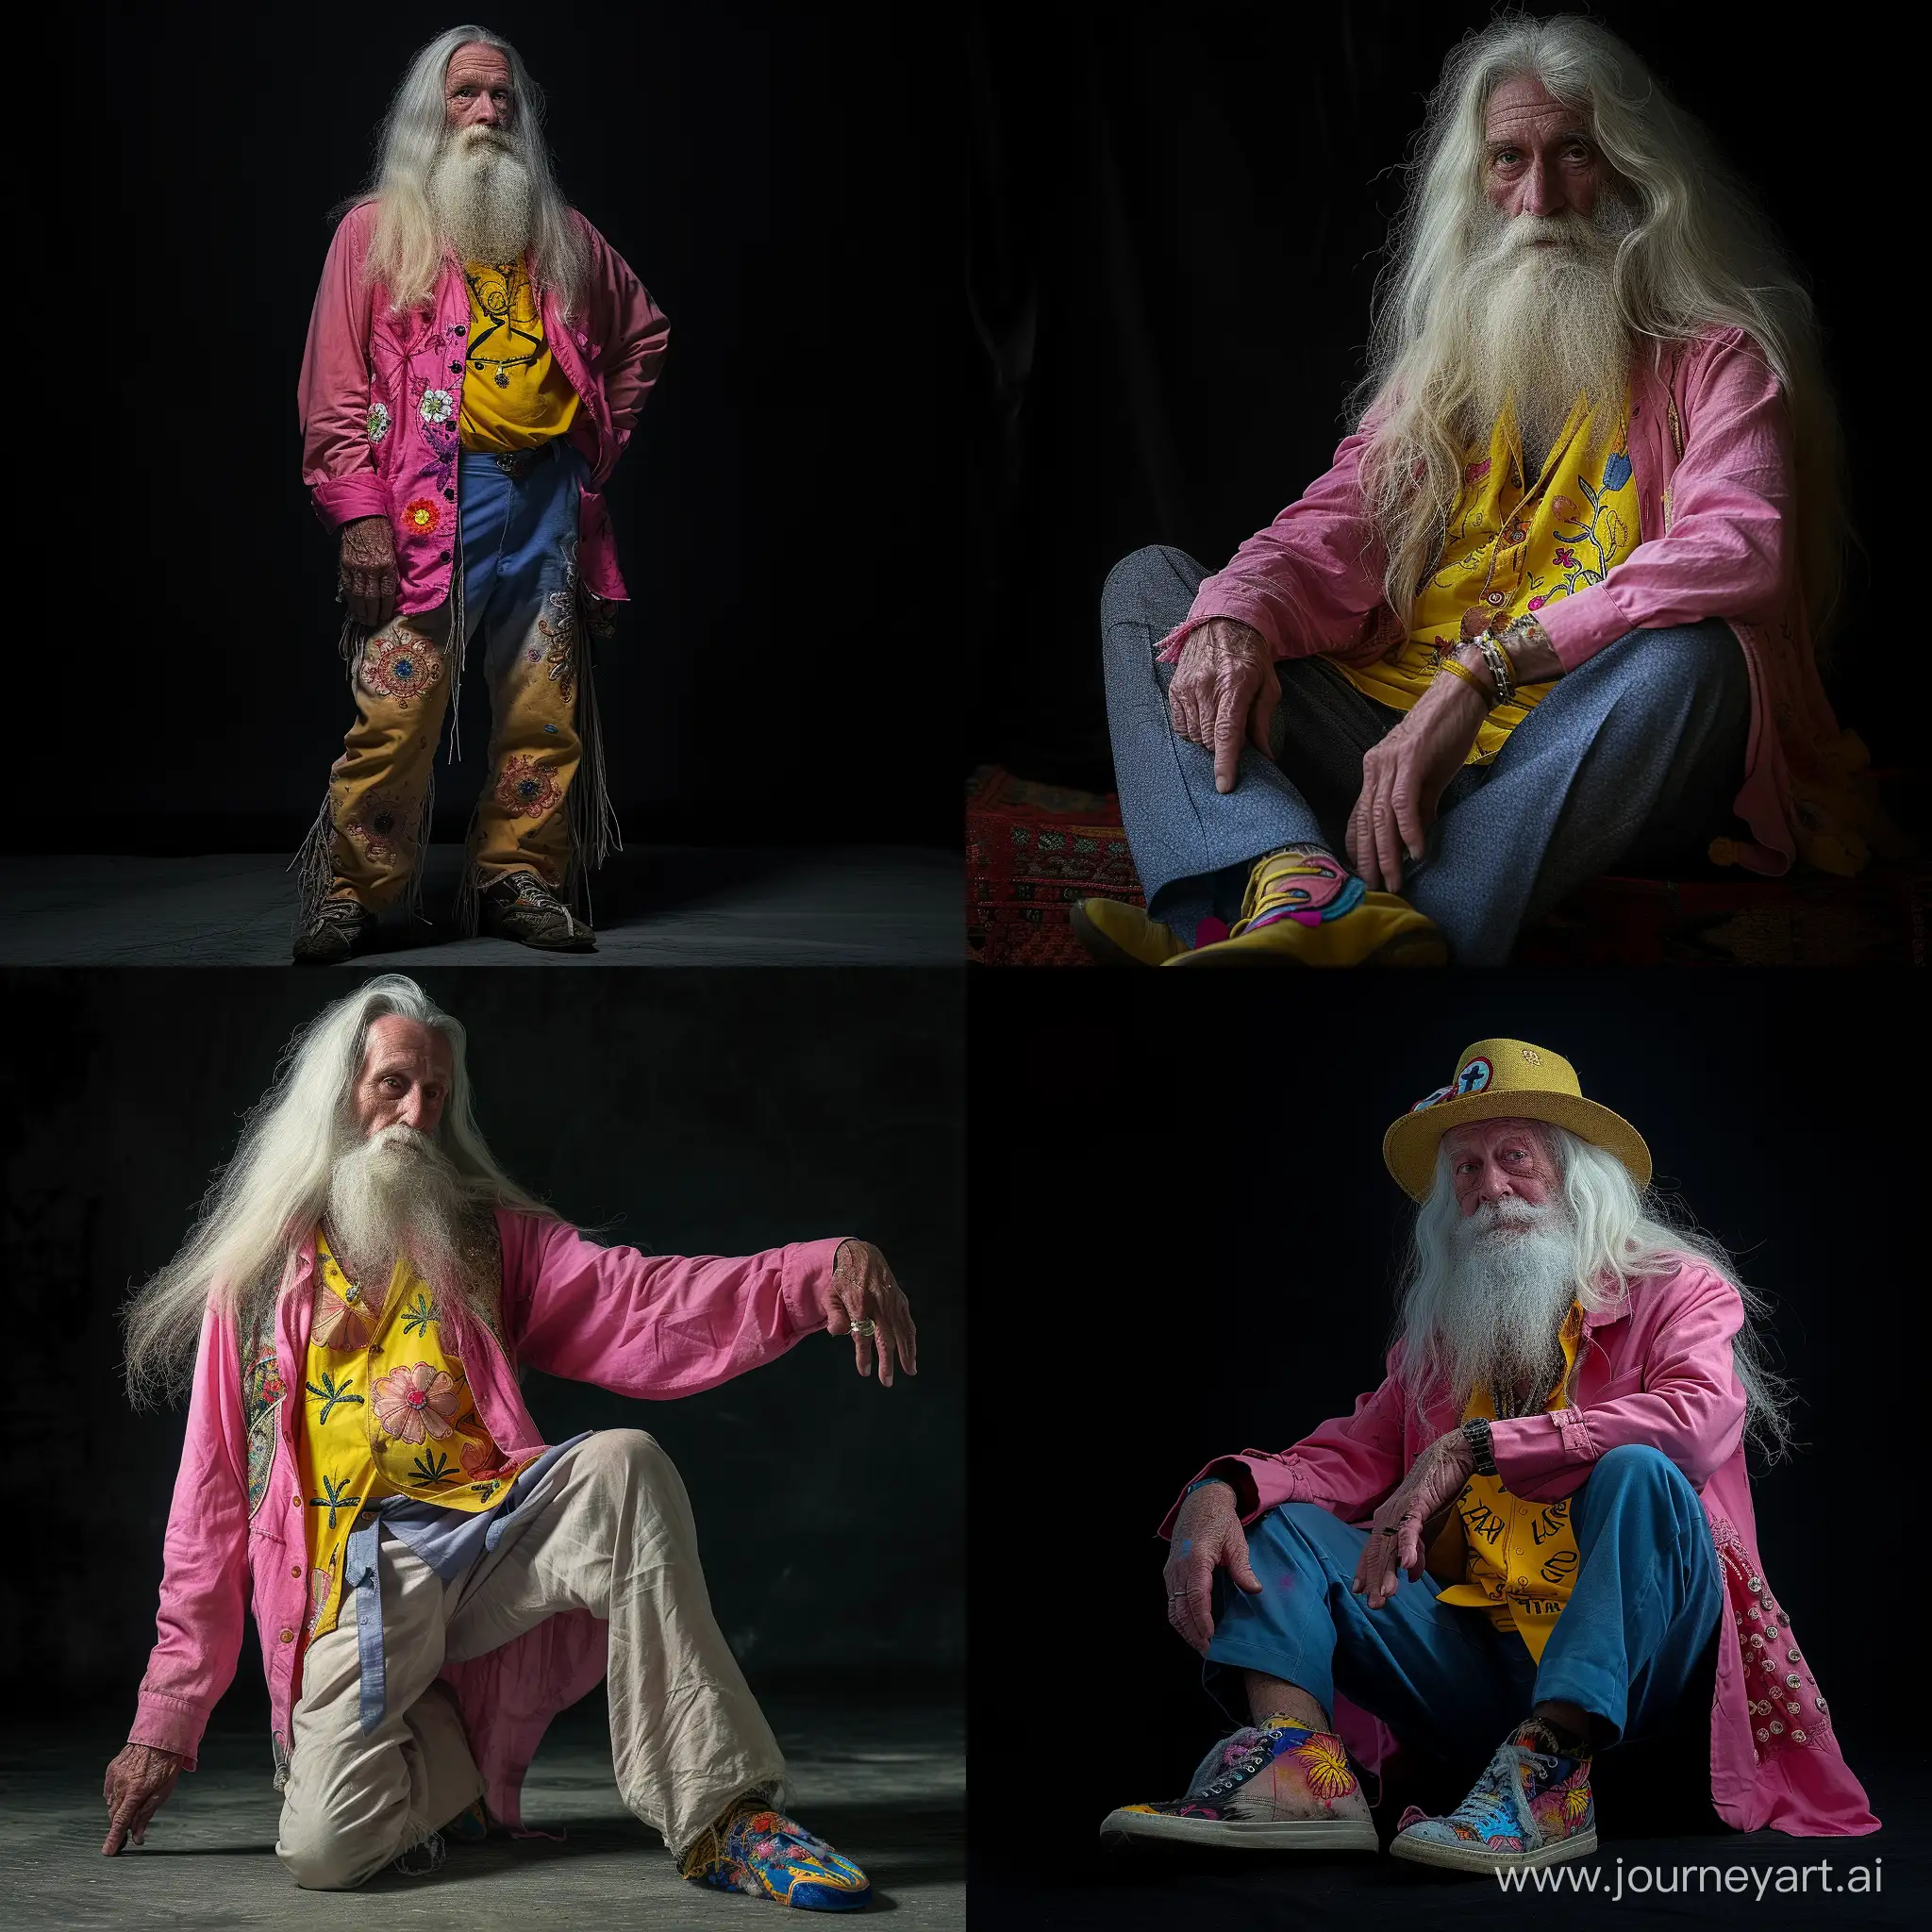 Elderly-Hippie-Man-with-Long-White-Hair-and-Beard-Wearing-Pink-Jacket-and-Yellow-Shirt-in-Floral-Shoes-on-Black-Background